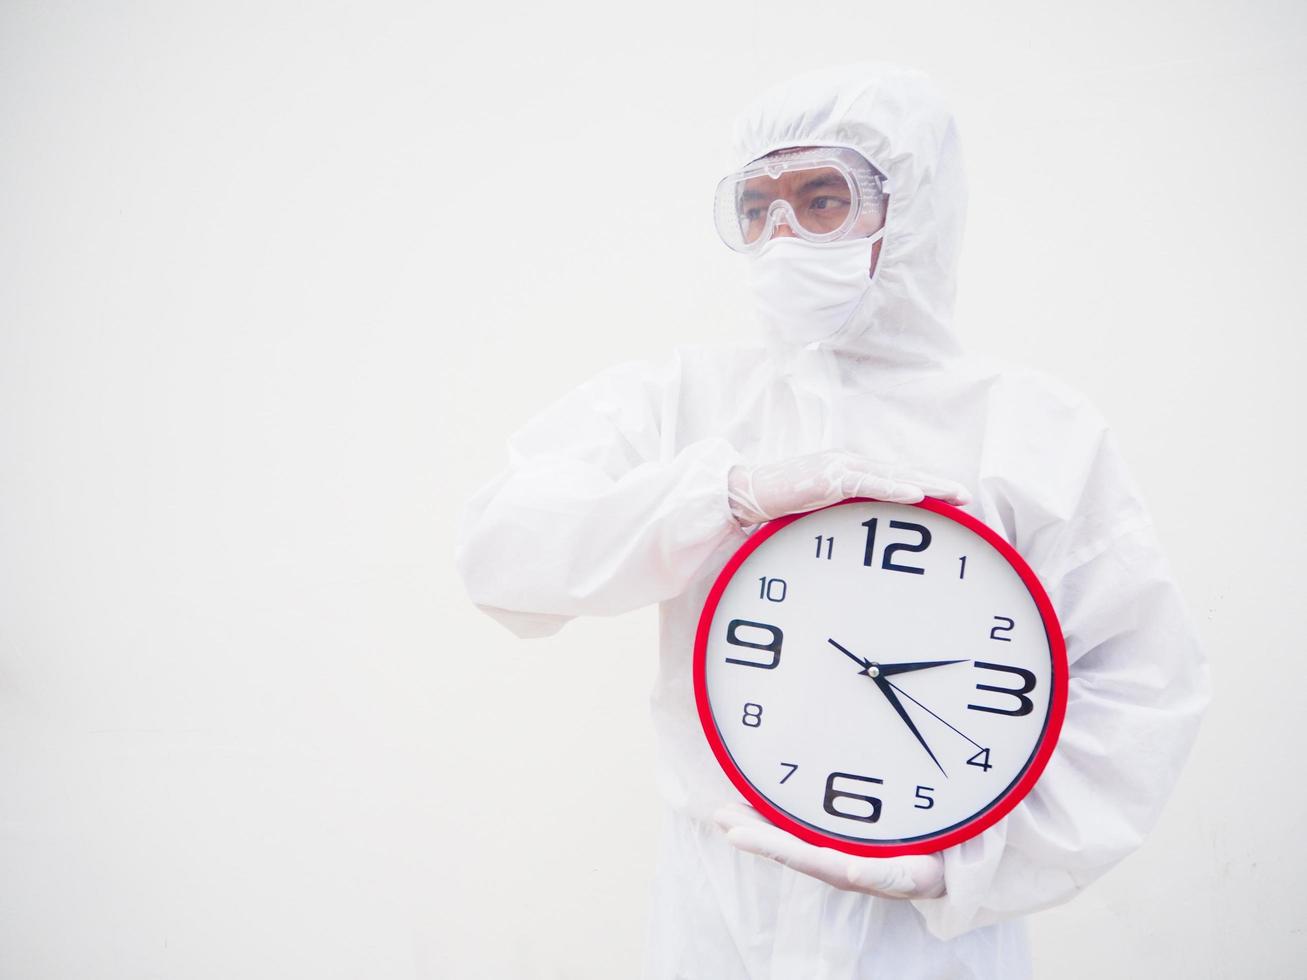 Portrait of doctor or scientist in PPE suite uniform holding red alarm clock and looking to the right In various gestures. COVID-19 concept isolated white background photo